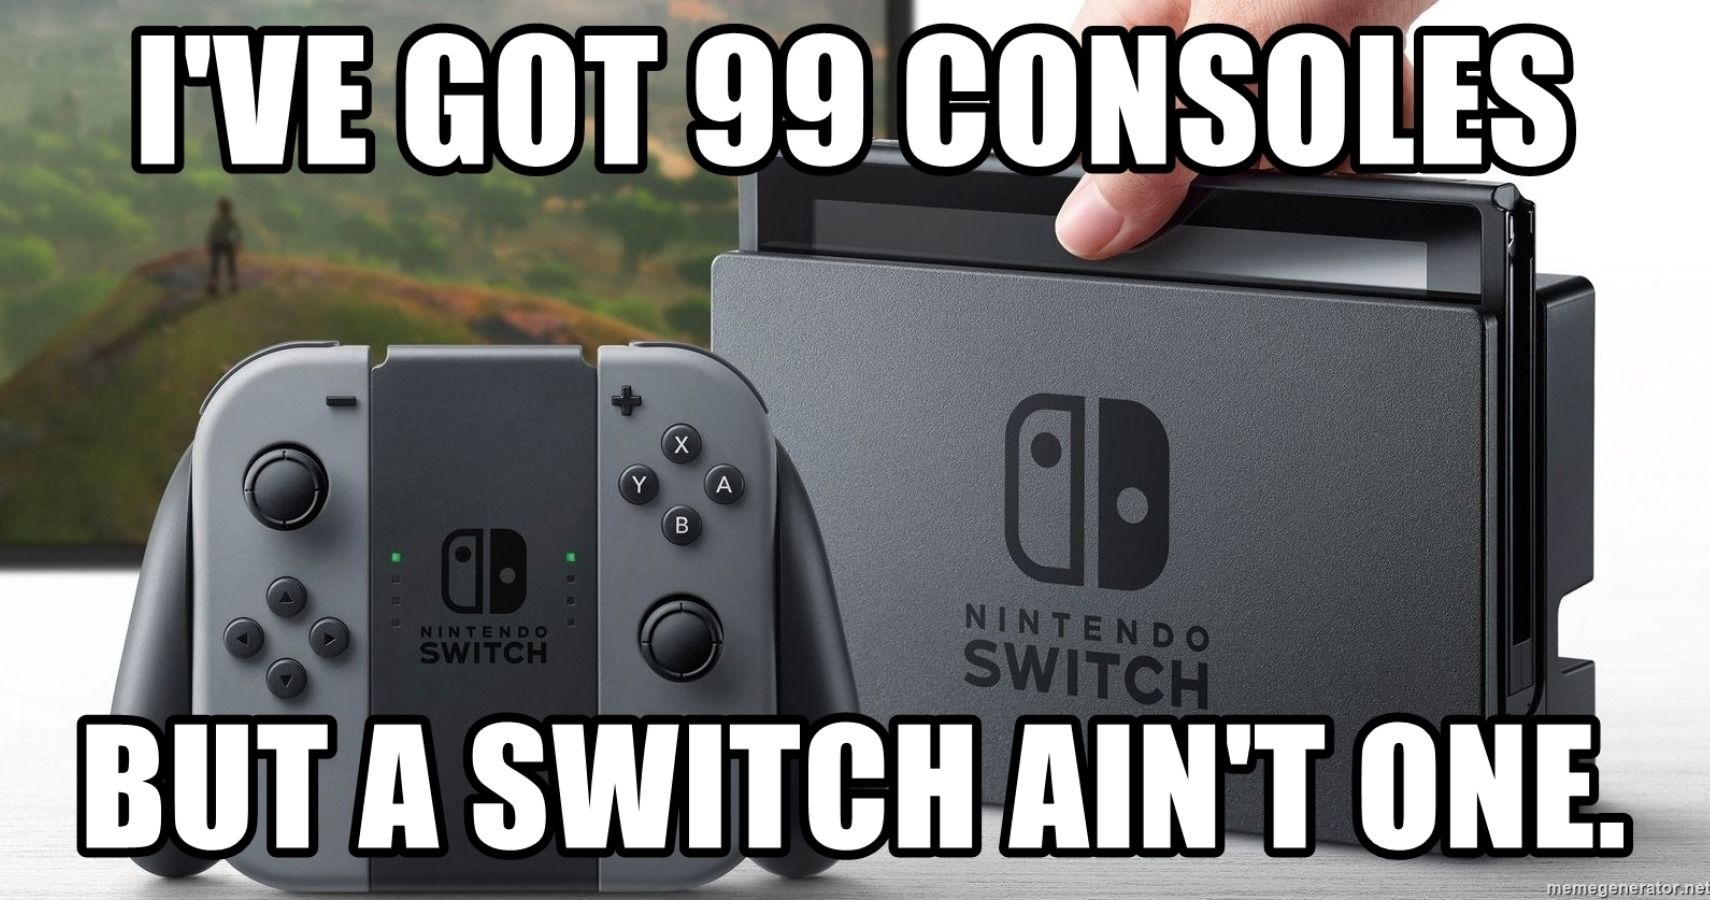 10 Memes About The Nintendo Switch Being Sold Out In Stores